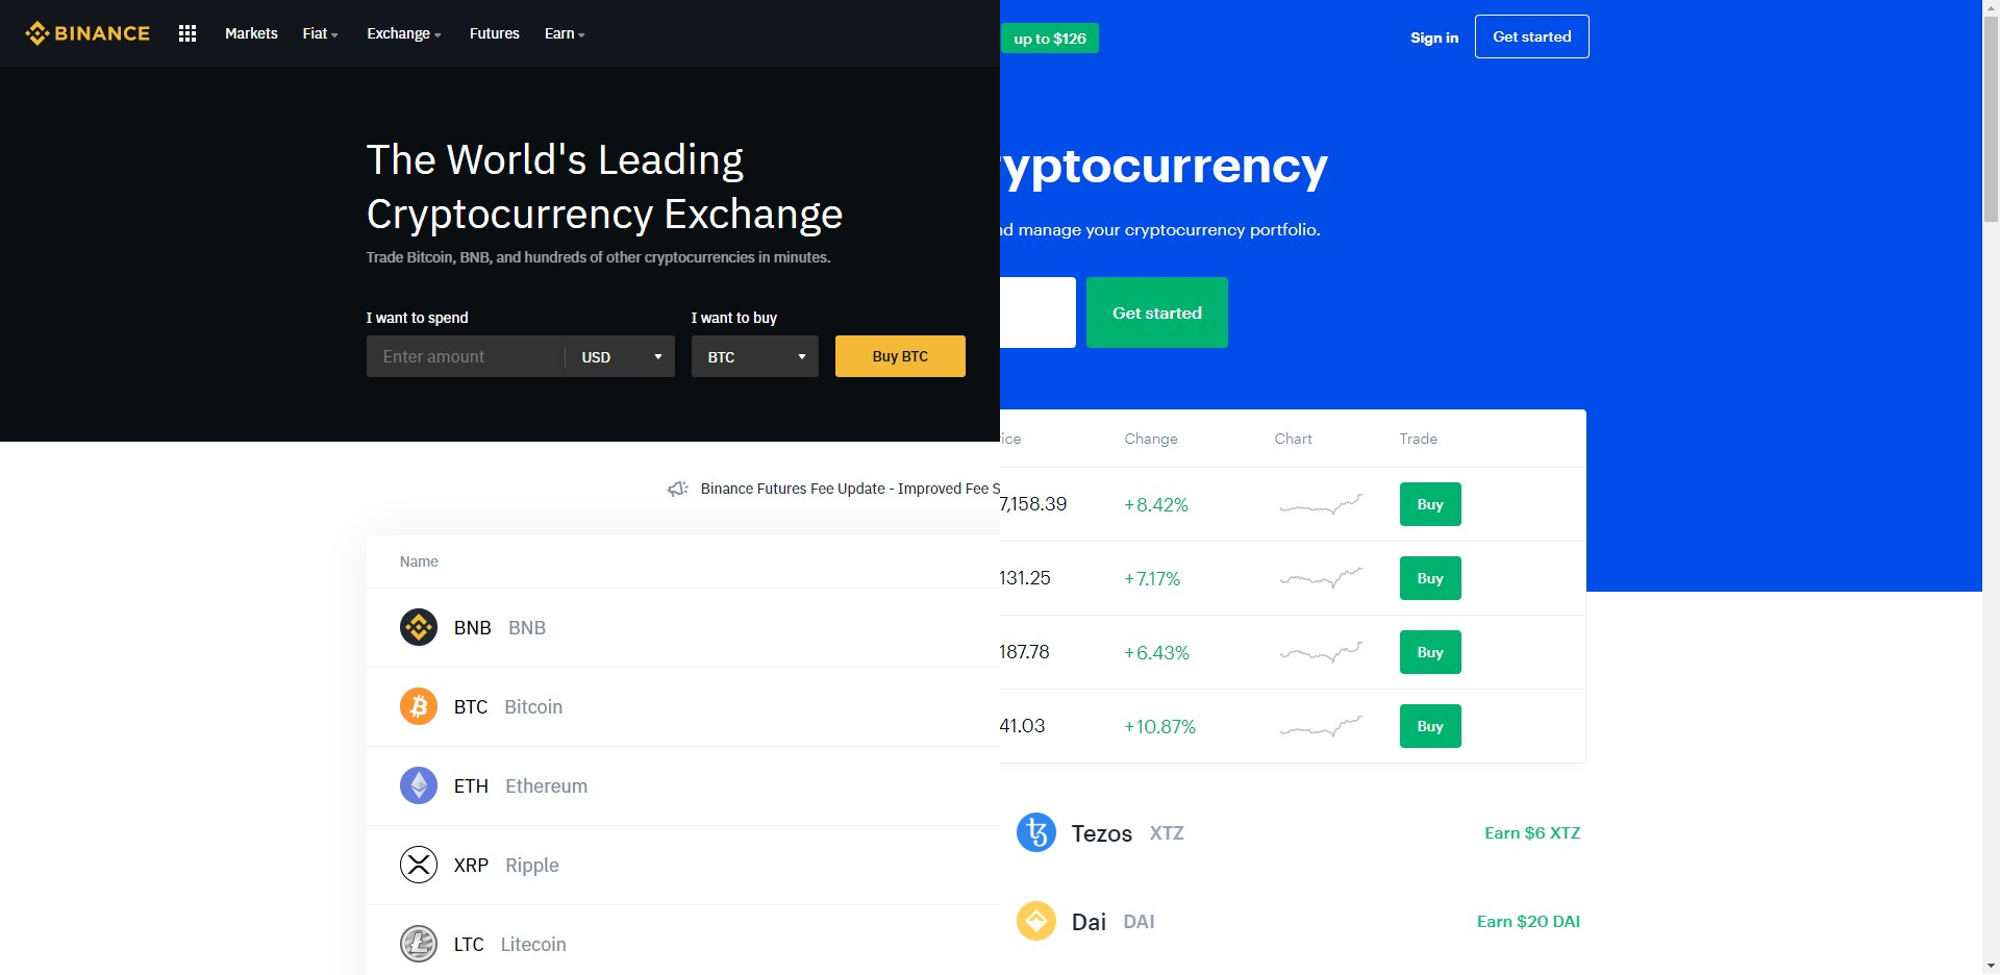 Binance vs. Coinbase - Which Exchange Is Bigger in 2020?